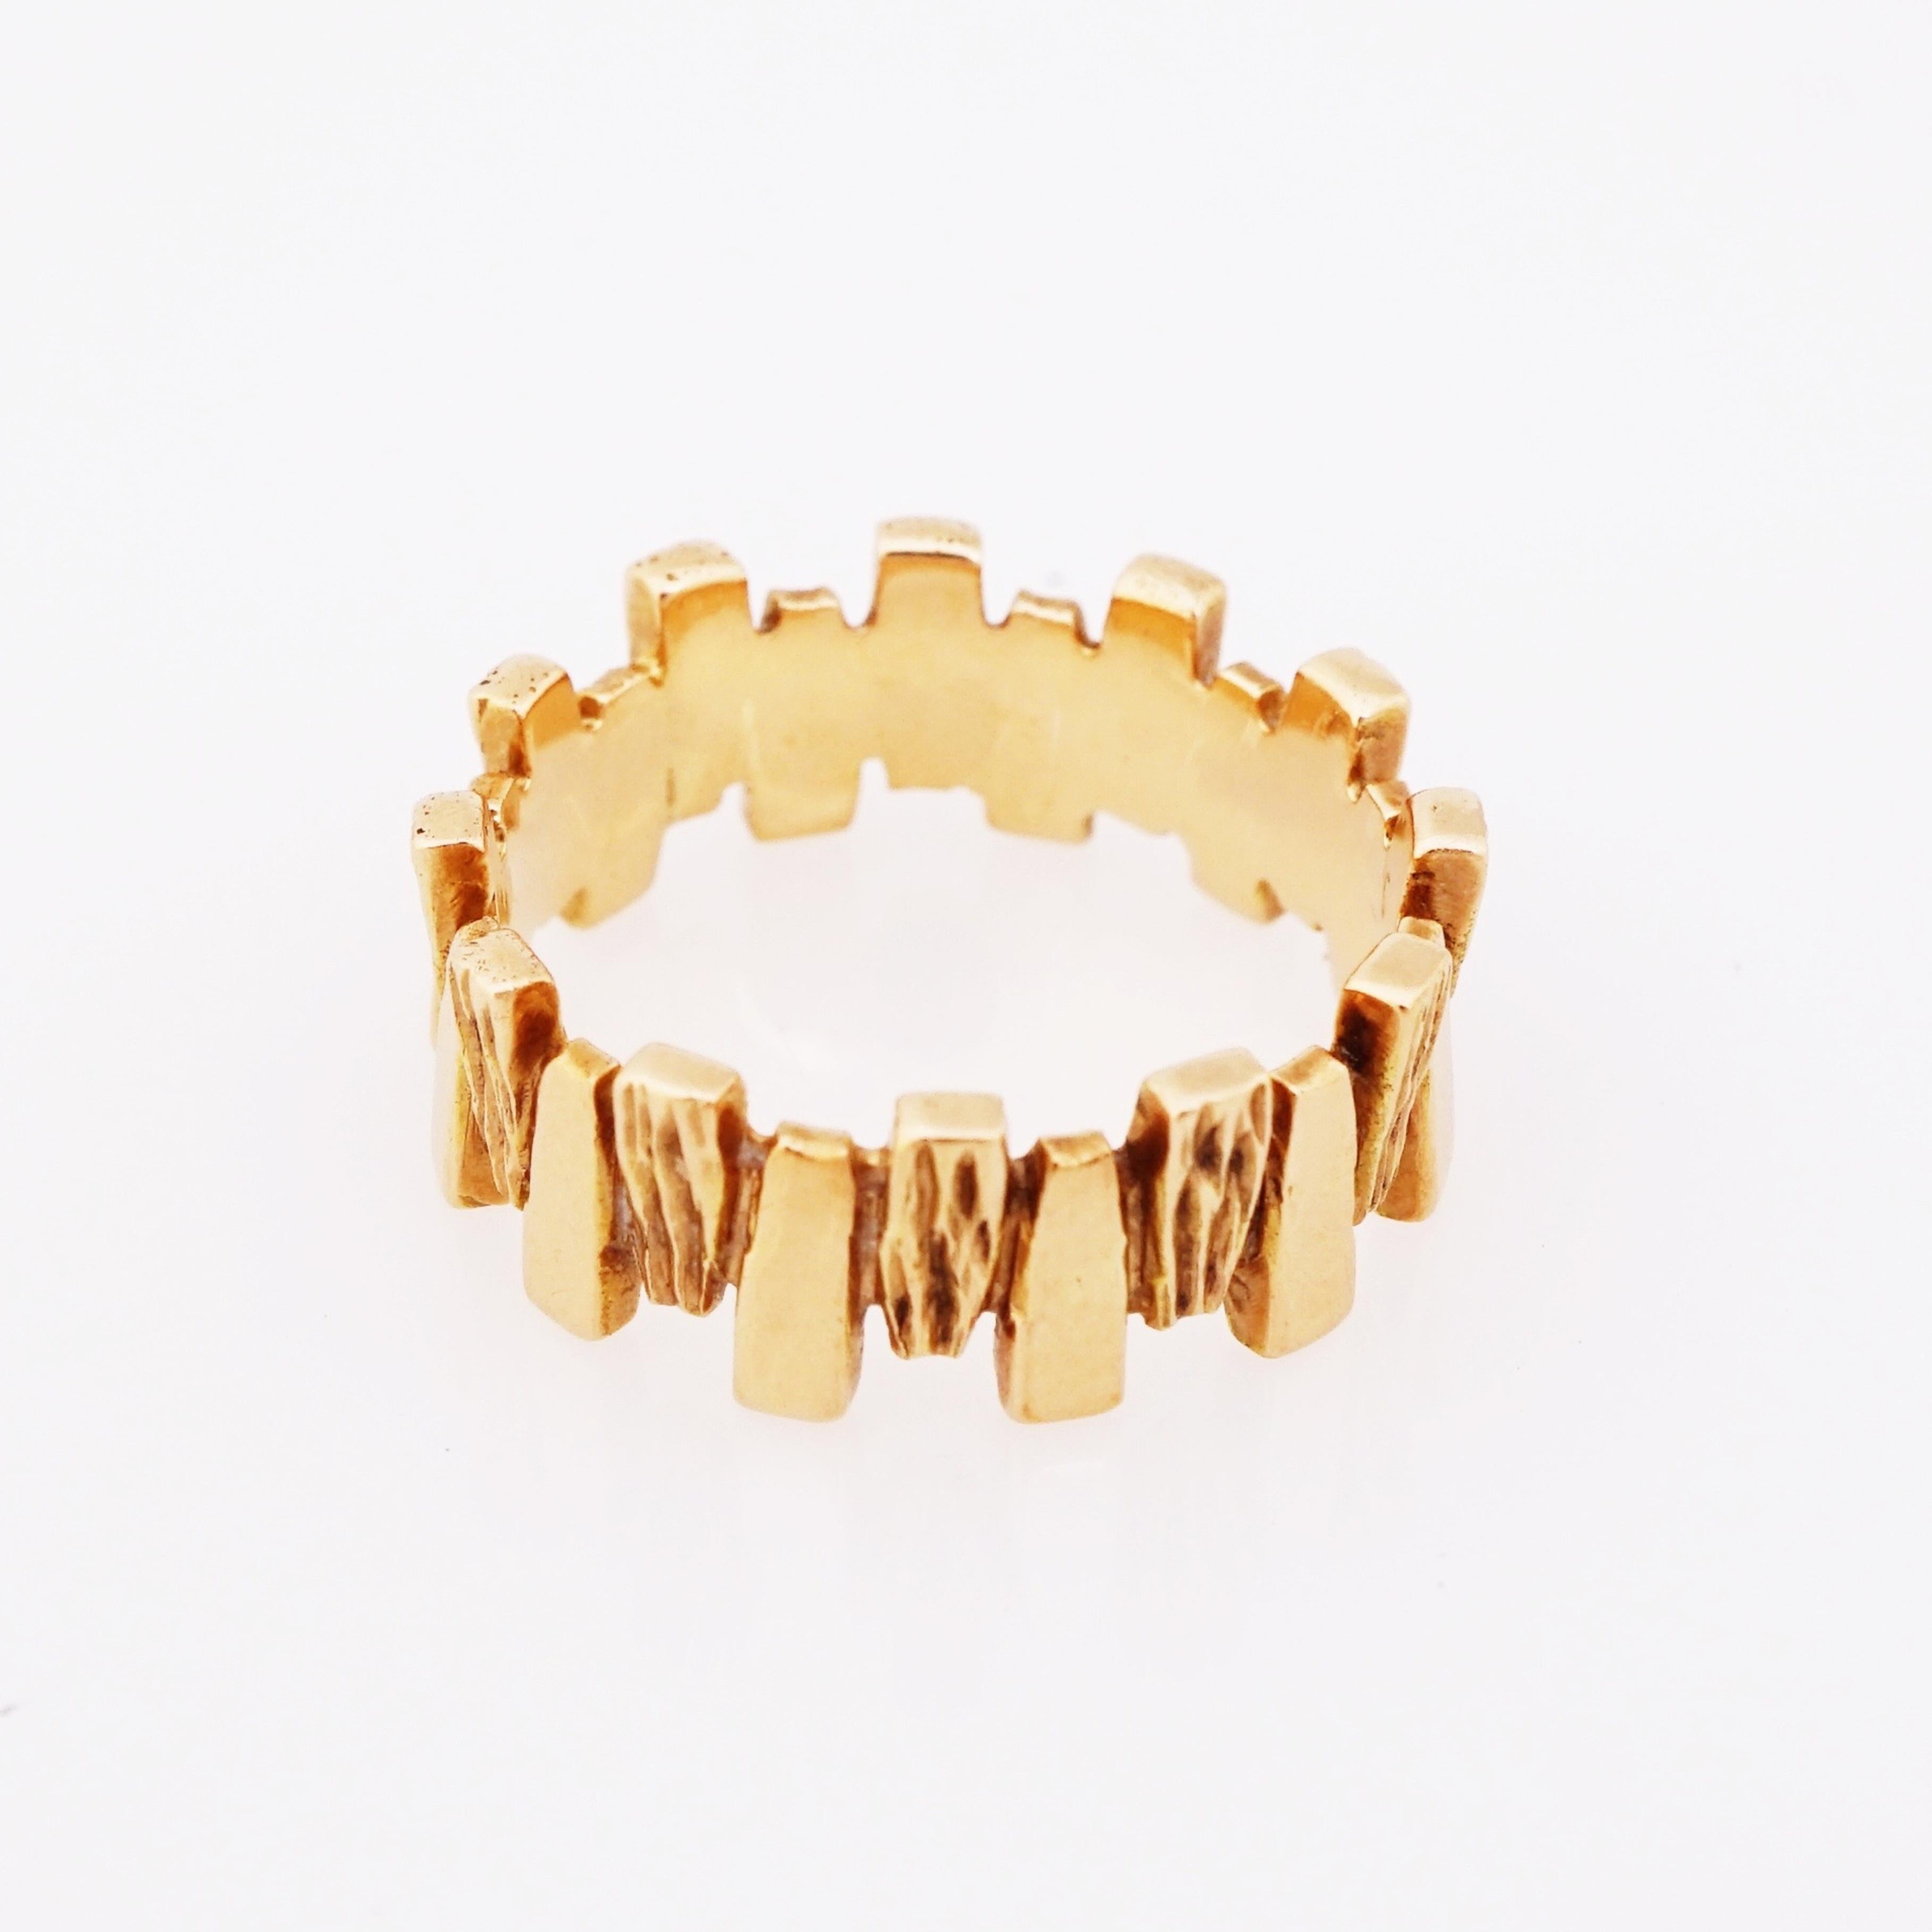 Women's 14k Gold Brutalist Textured and Polished Ring, 1970s